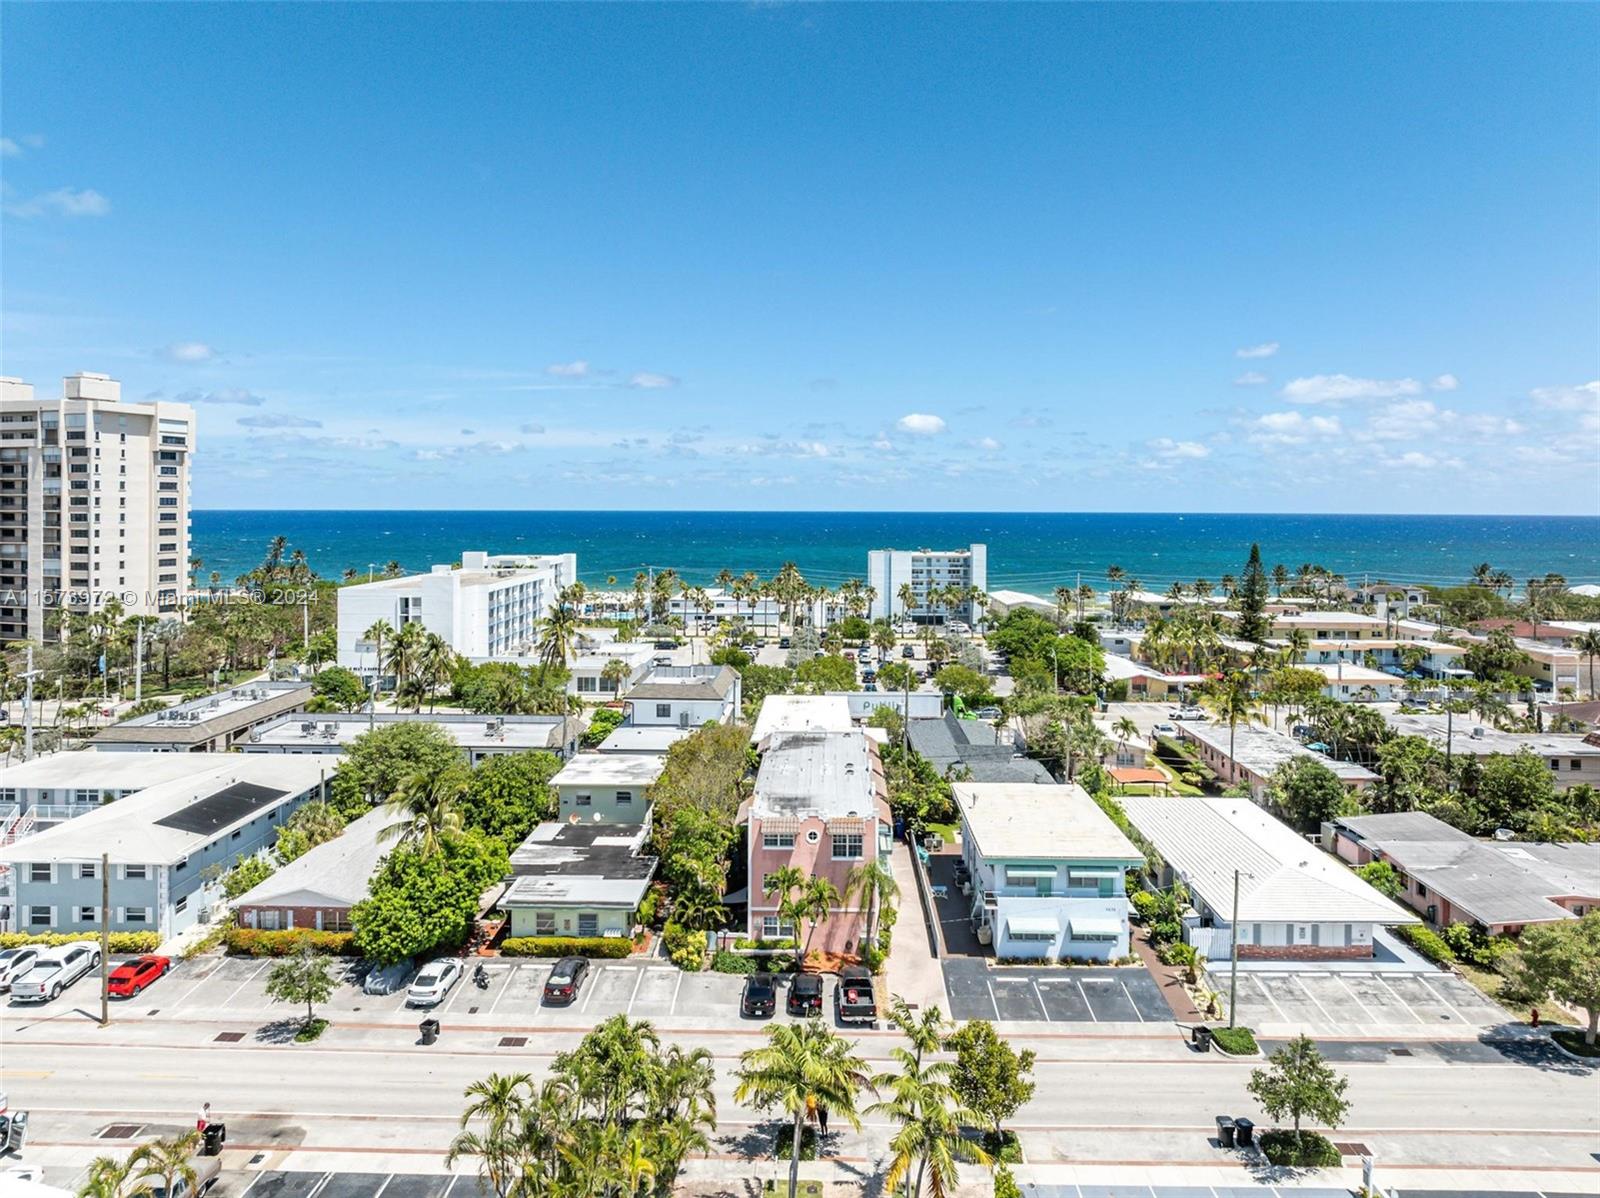 View Lauderdale By The Sea, FL 33308 townhome